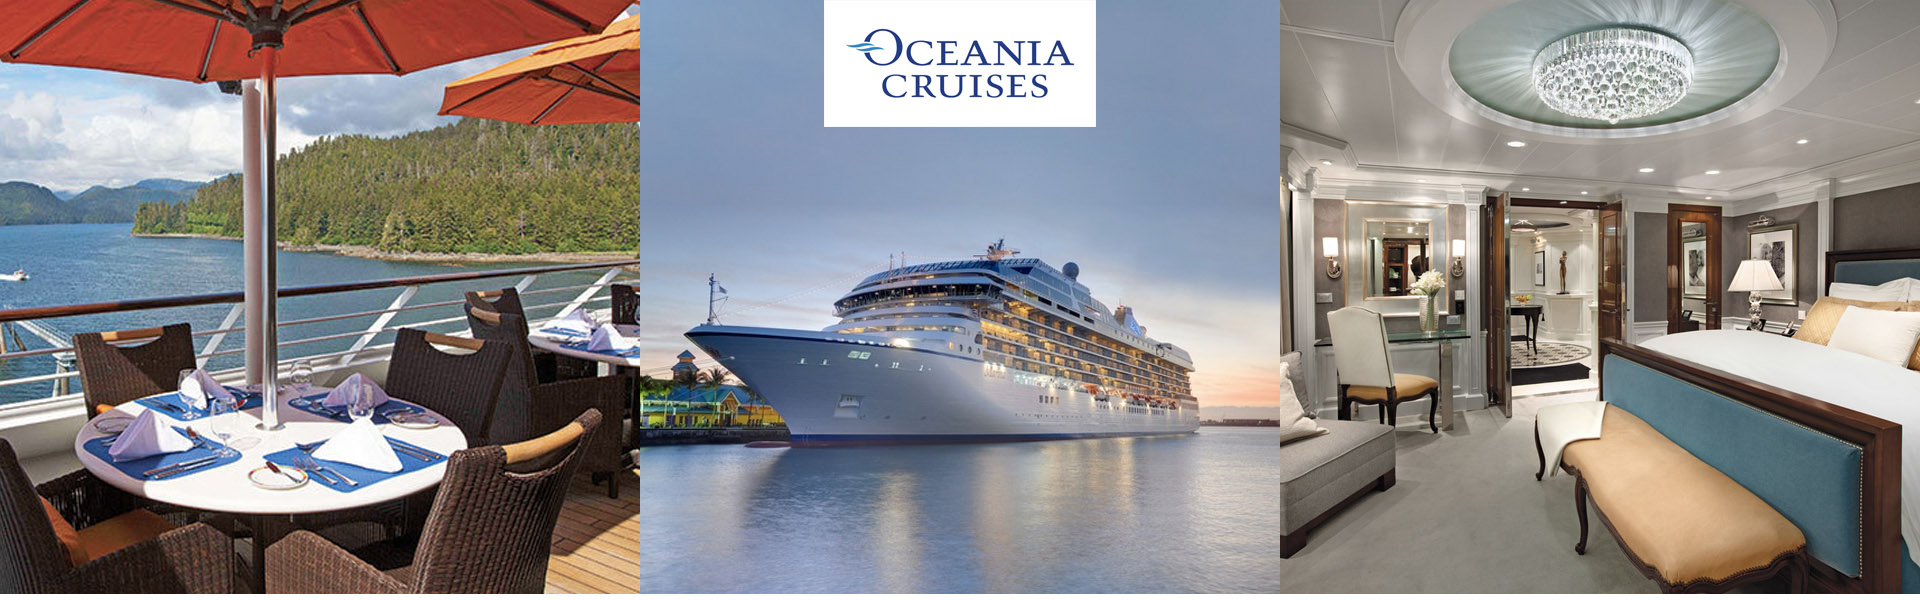 oceania cruise questions